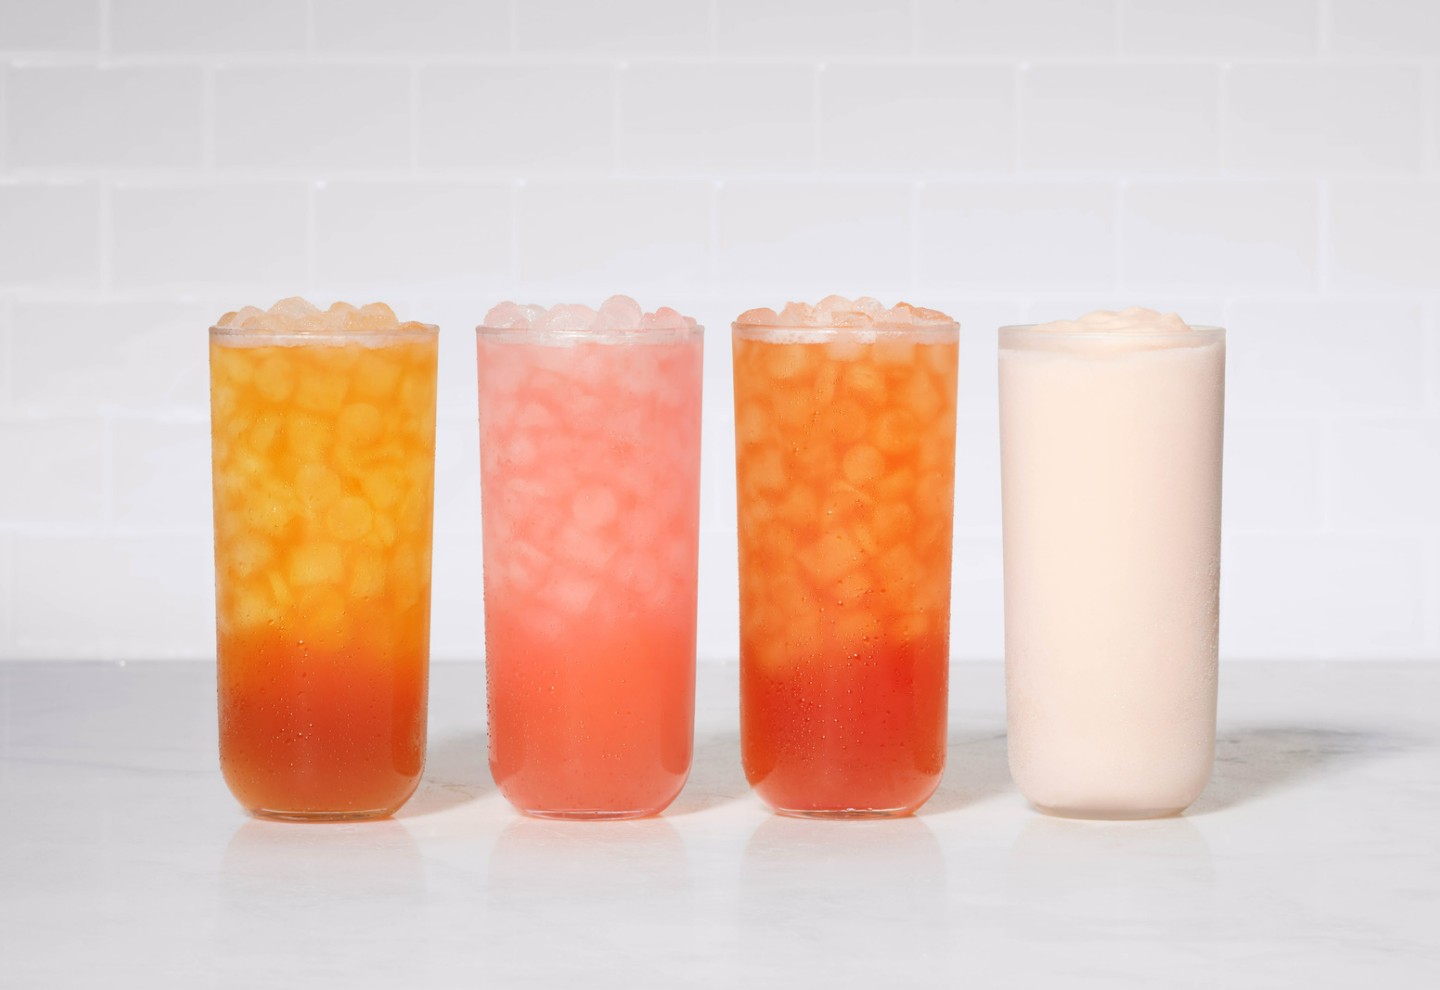 A Watermelon Mint Sunjoy, a Watermelon Mint Lemonade, A Watermelon Mint Iced Tea and a Watermelon Mint Frosted Lemonade are positioned side by side in glasses. 